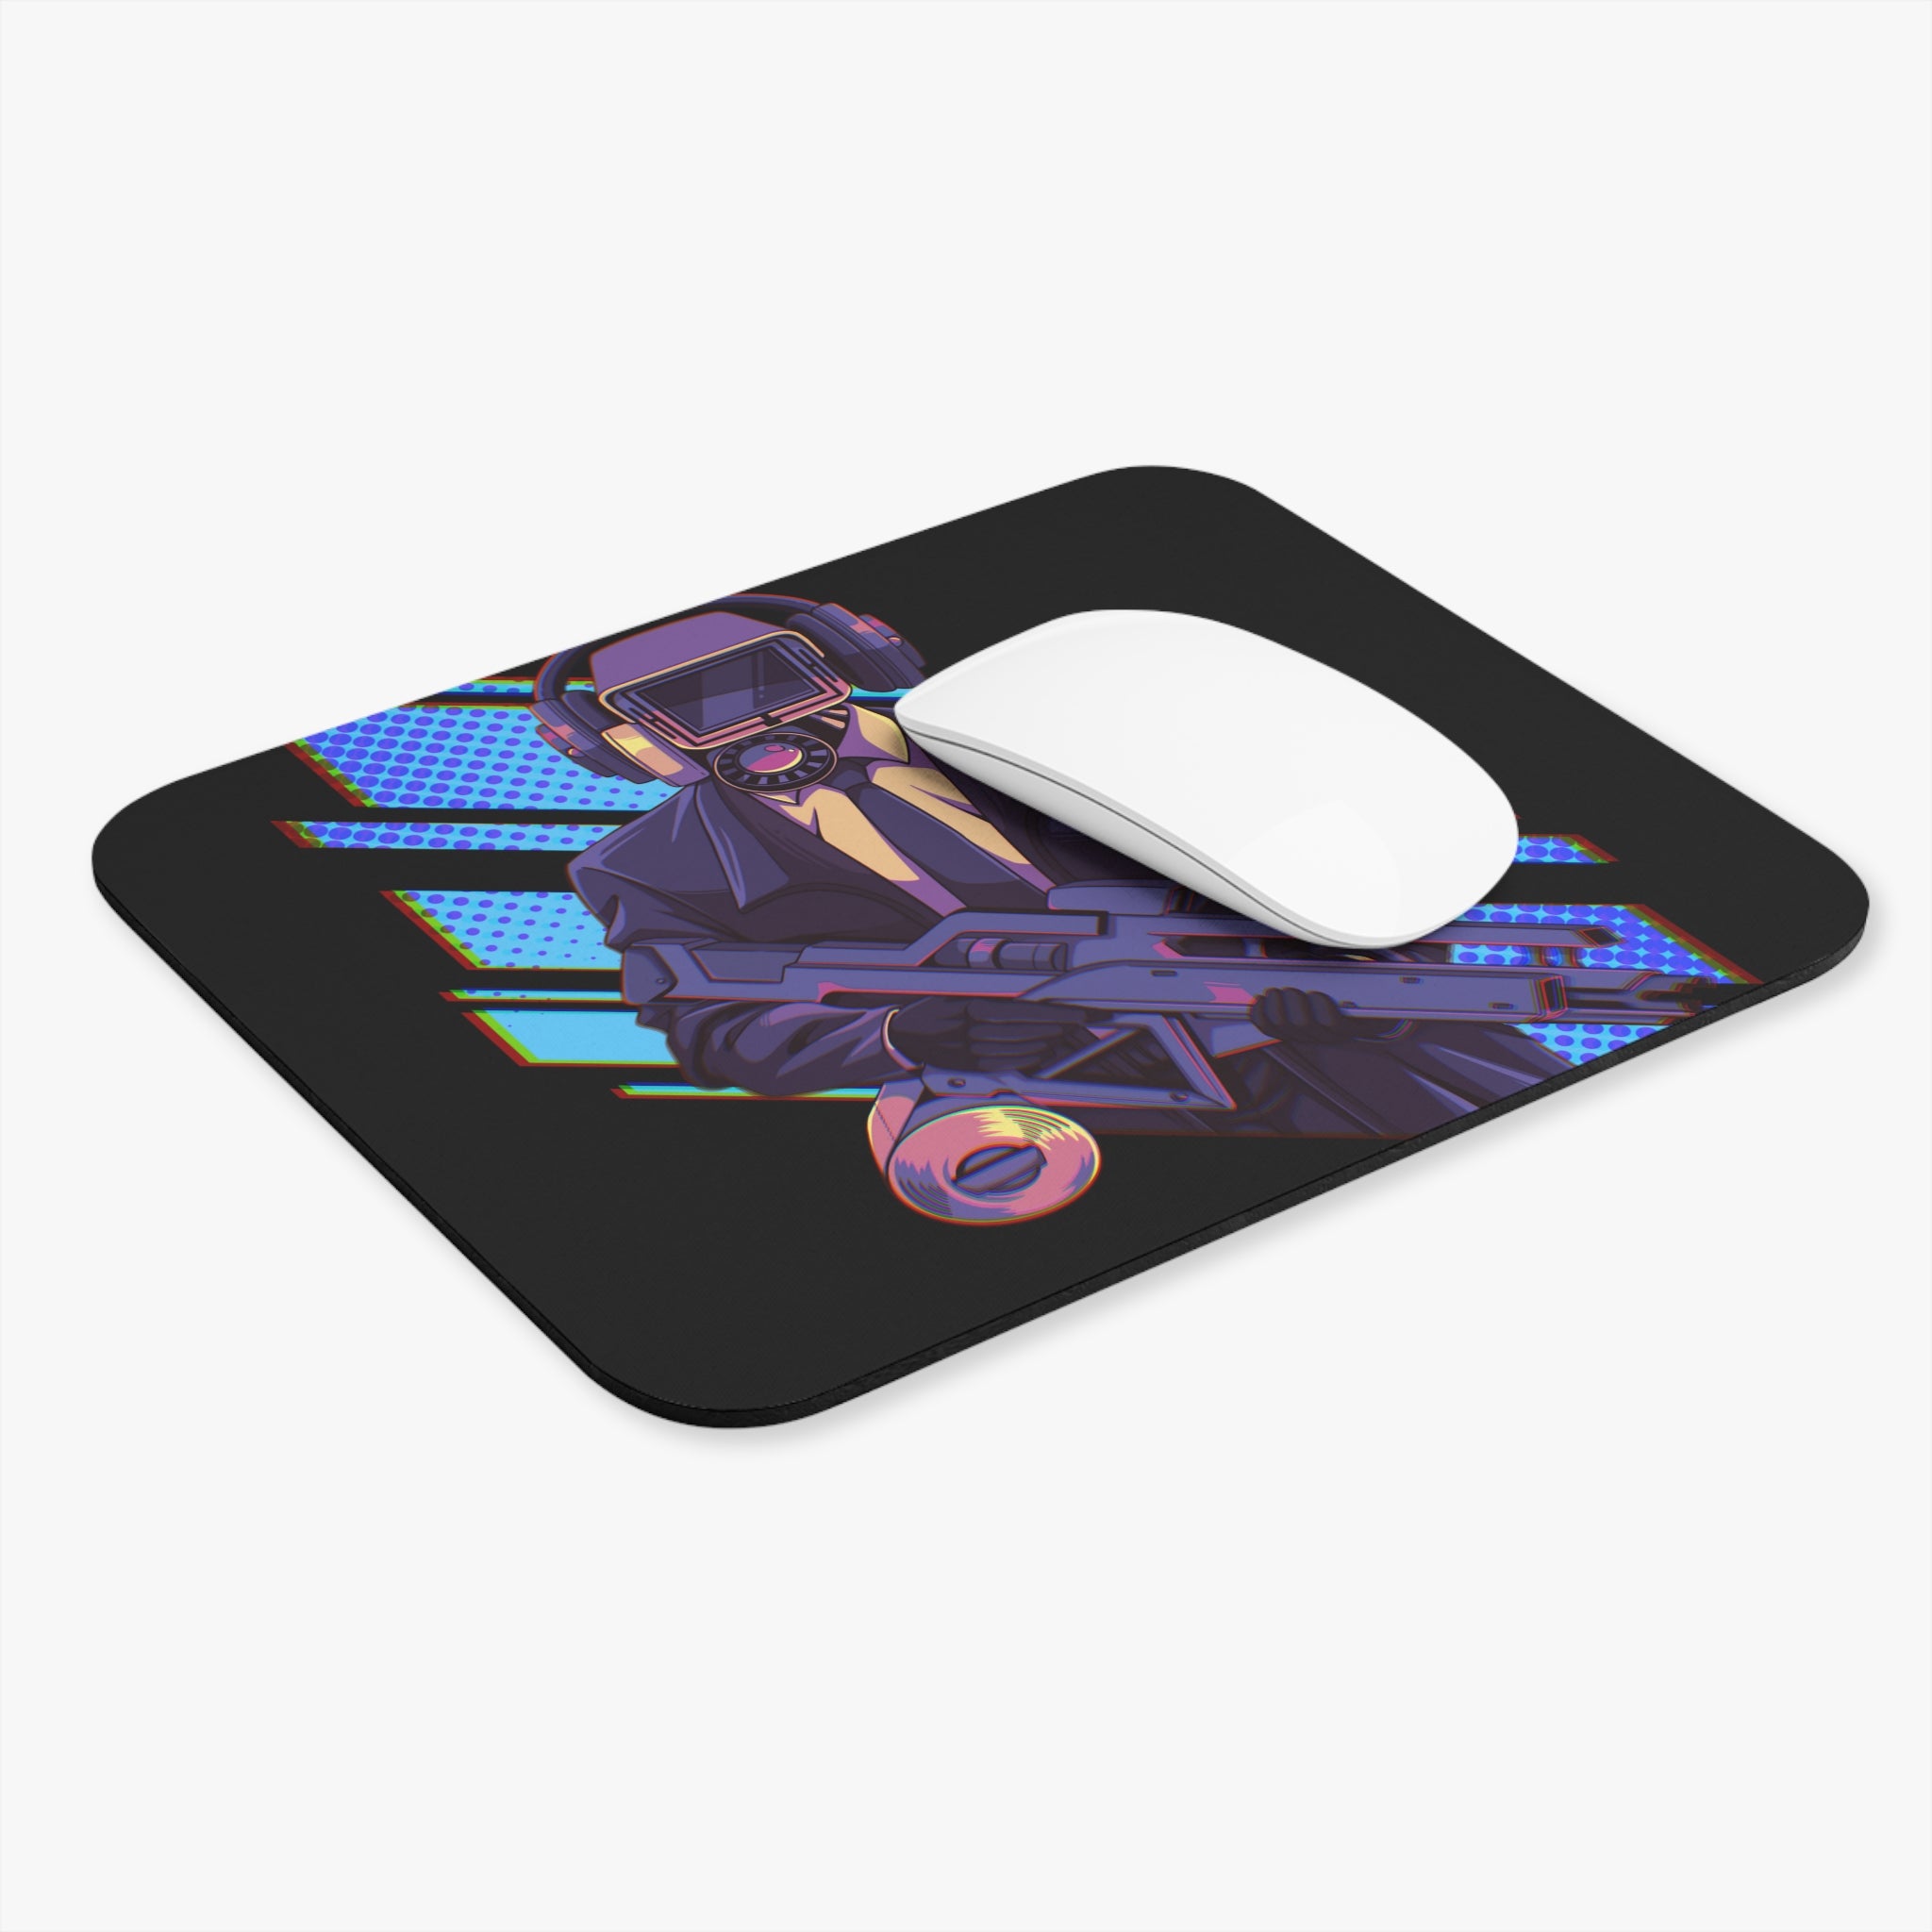 Cybercam Mouse Pad